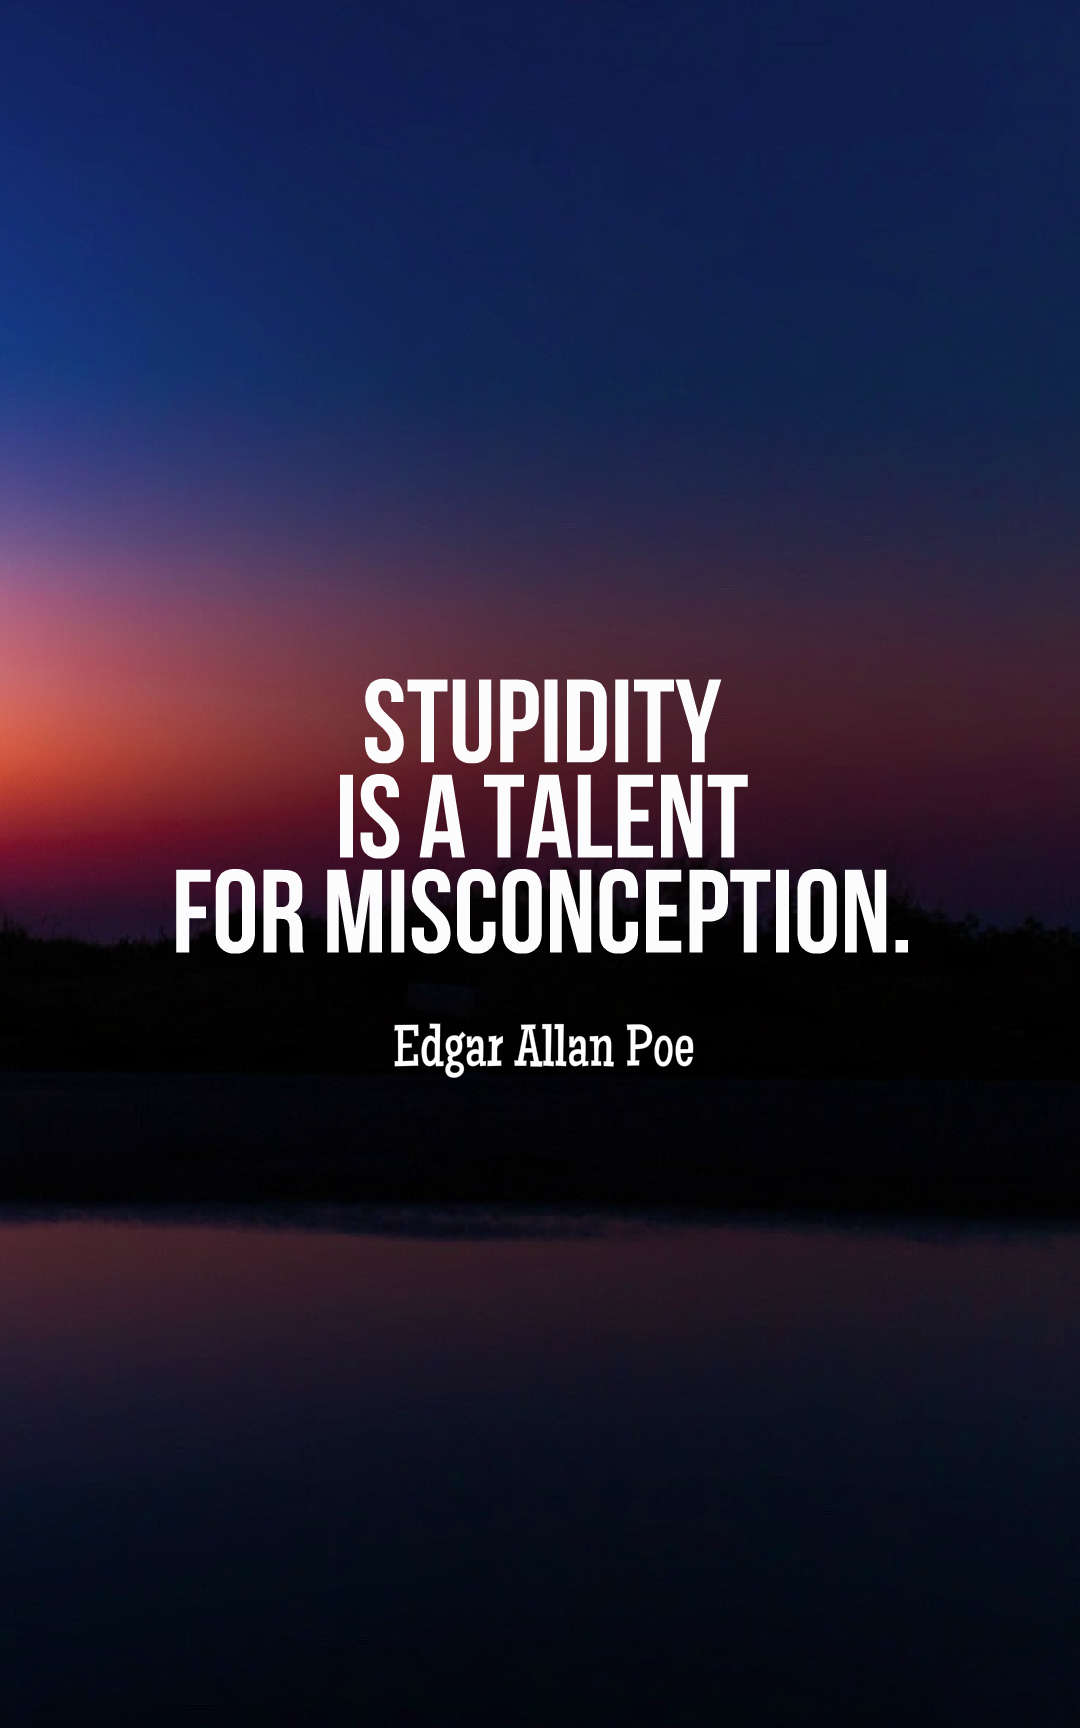 Stupidity Quotes 45 Quotes About Stupidity And Ignorance